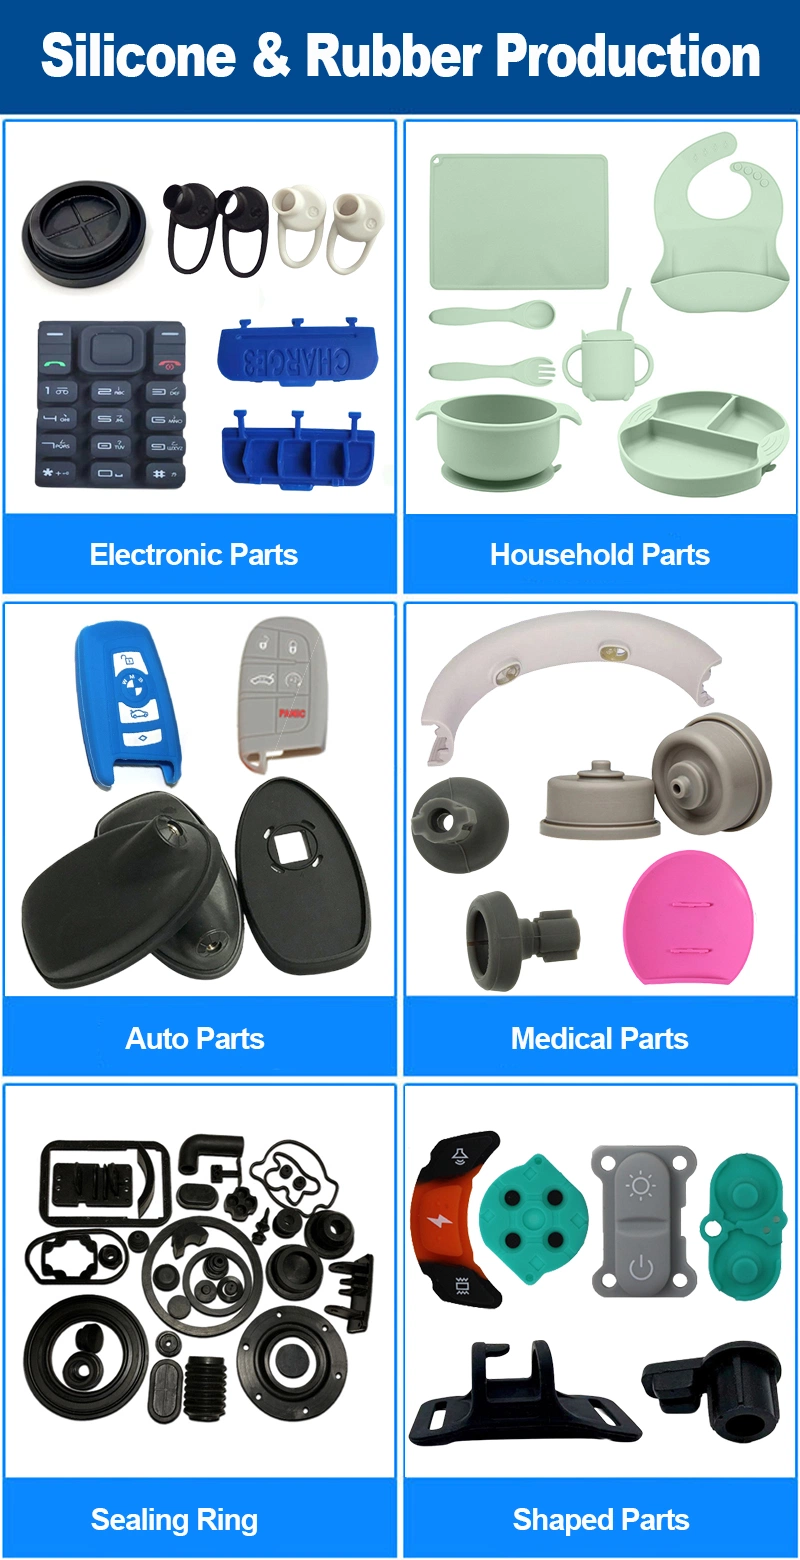 Custom HDPE Injection Molding for Silicon Home Products